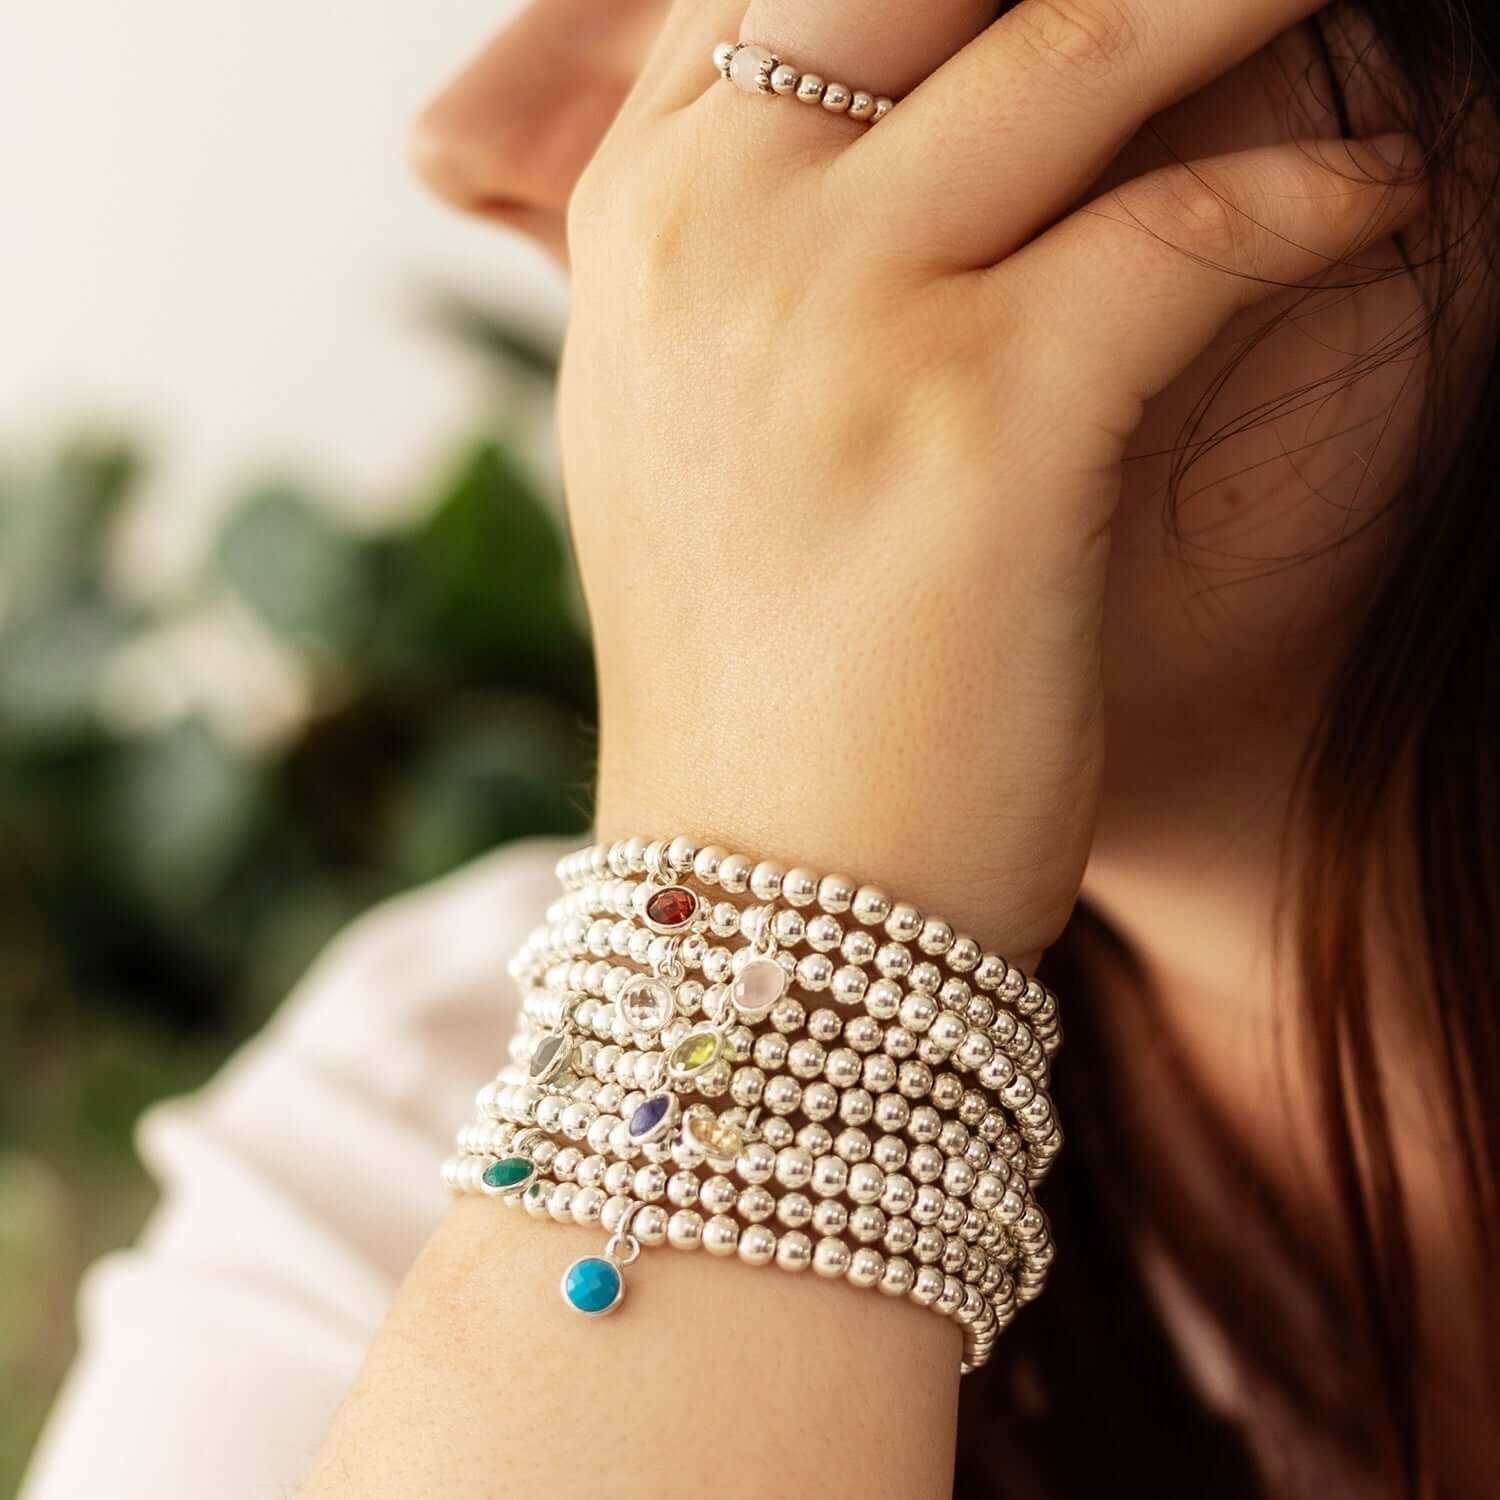 Wearing multiple pieces of silver women's jewellery, including beaded bracelets on their wrist, each adorned with small colorful charms. They have a matching beaded ring on their finger and are resting their hand on their cheek. 